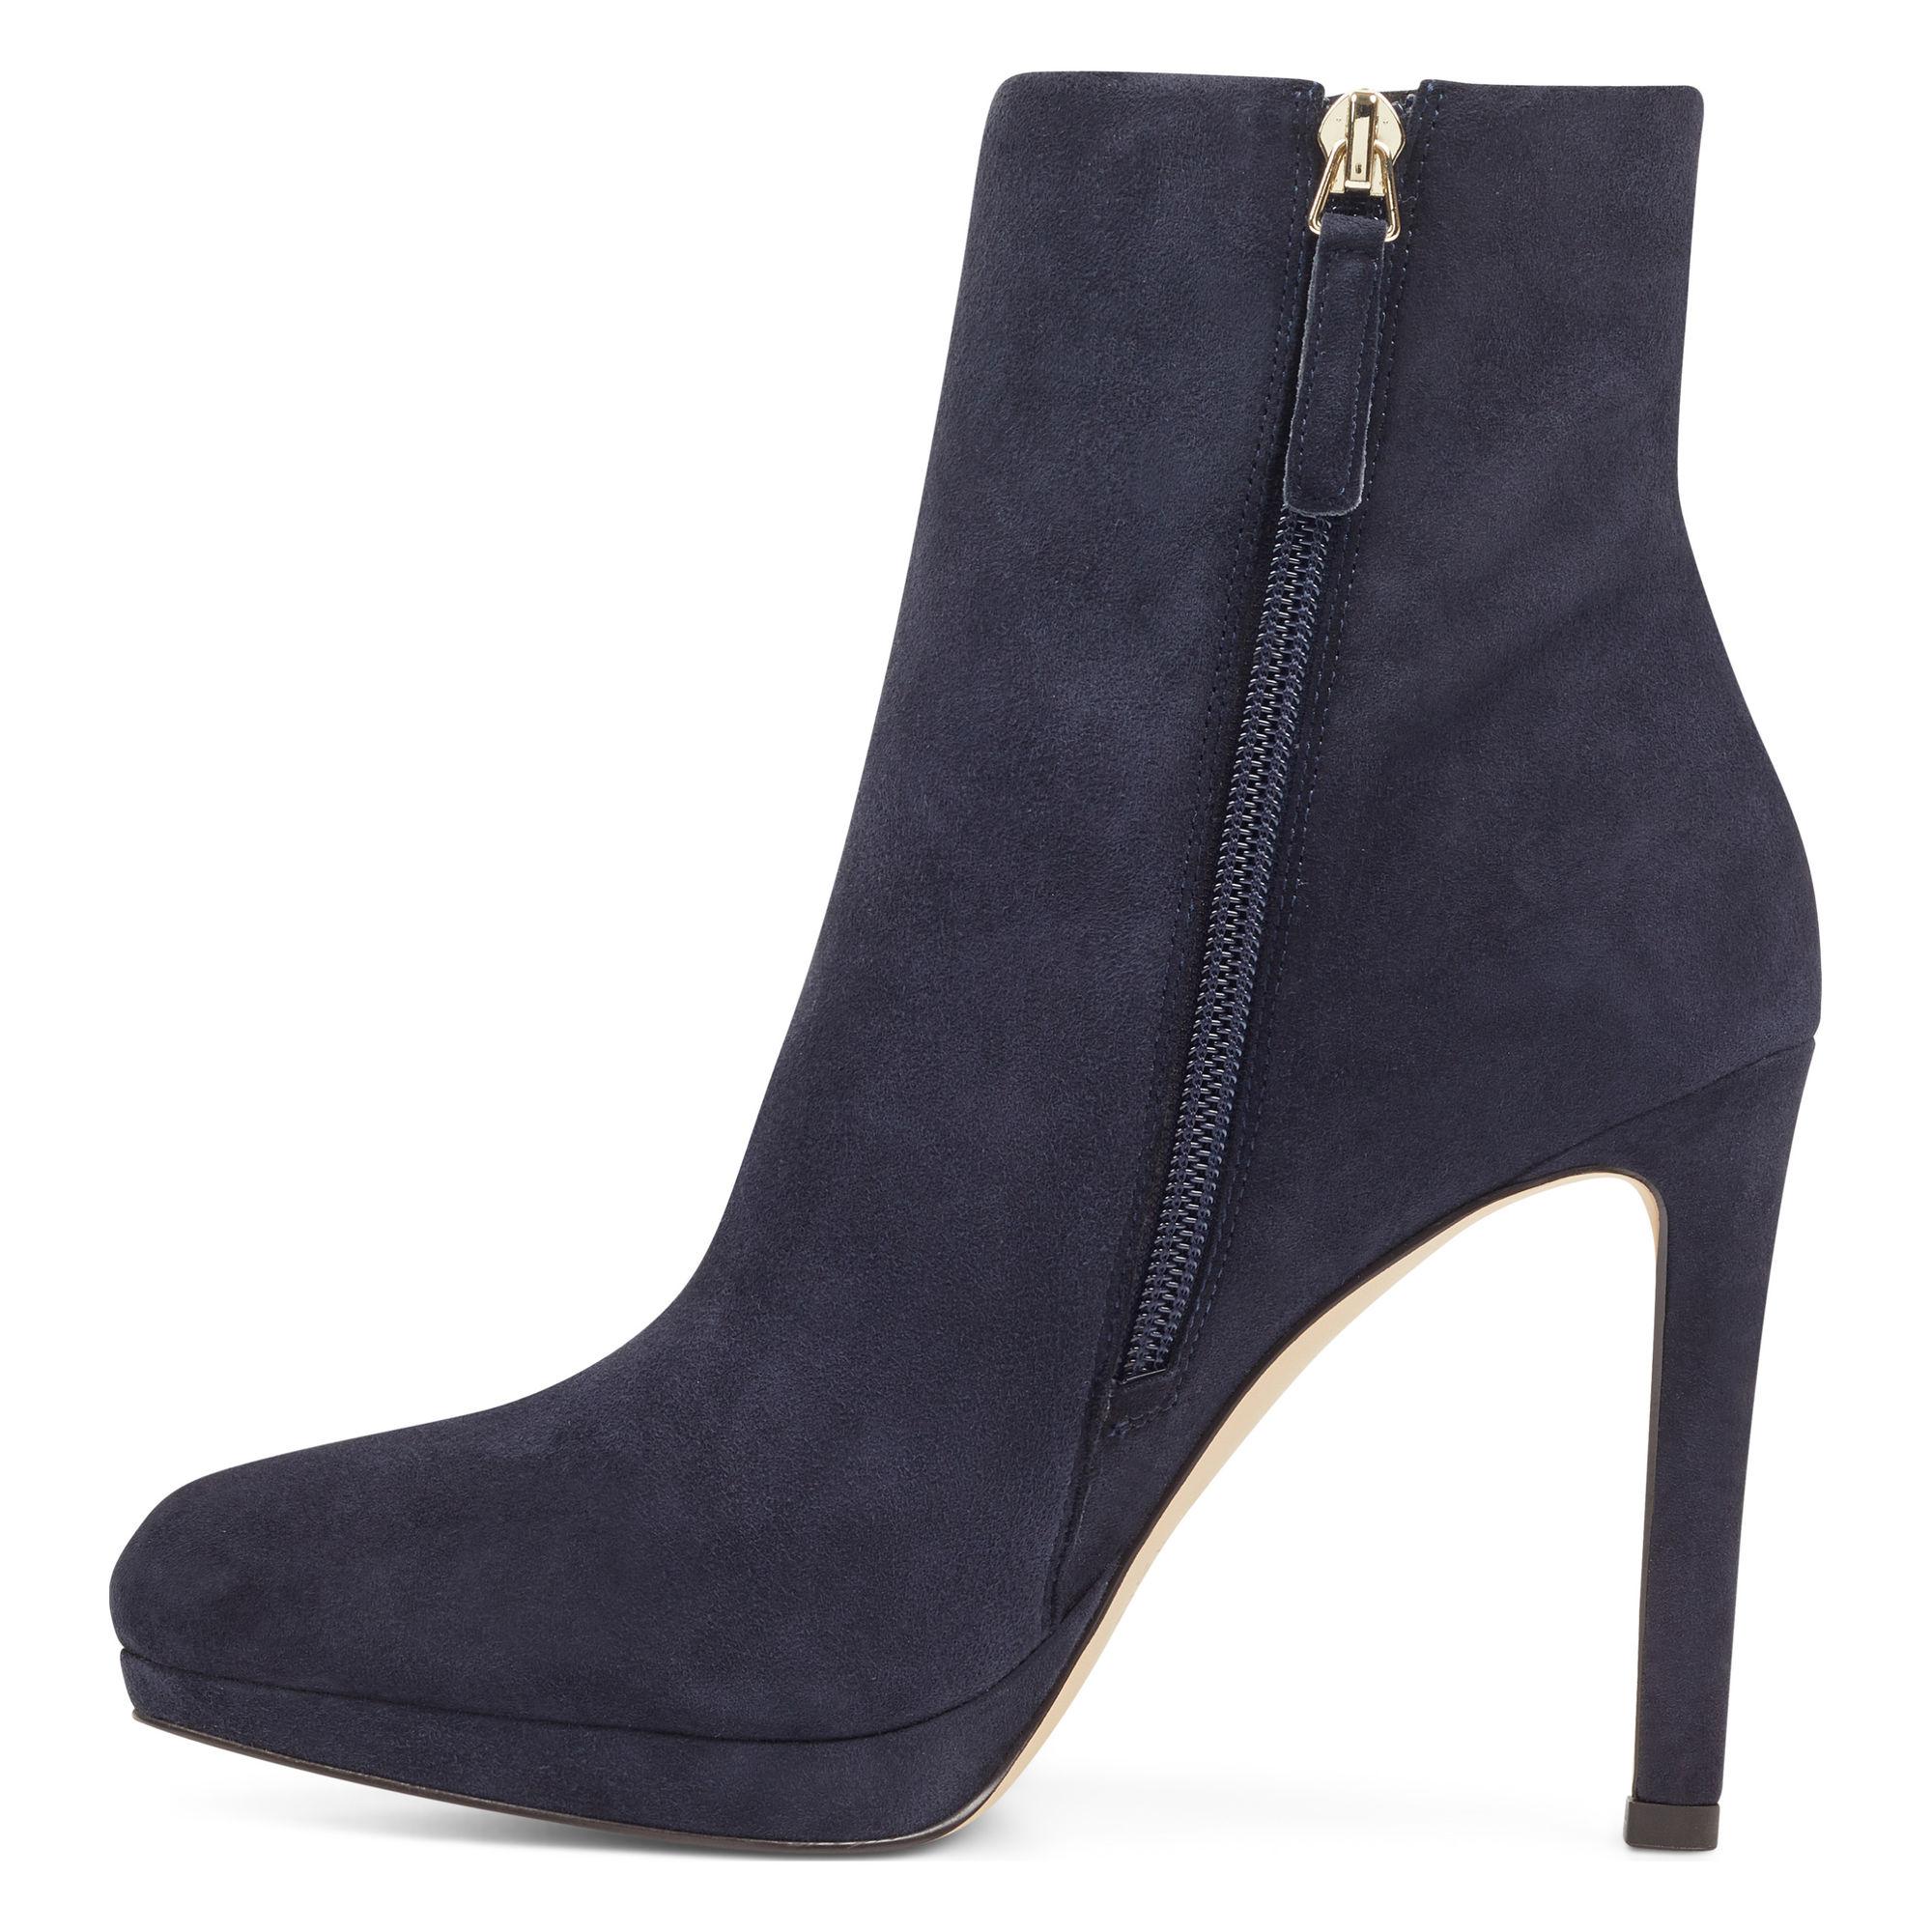 Nine West Leather Quanette Platform Booties in Navy Suede (Blue) - Lyst